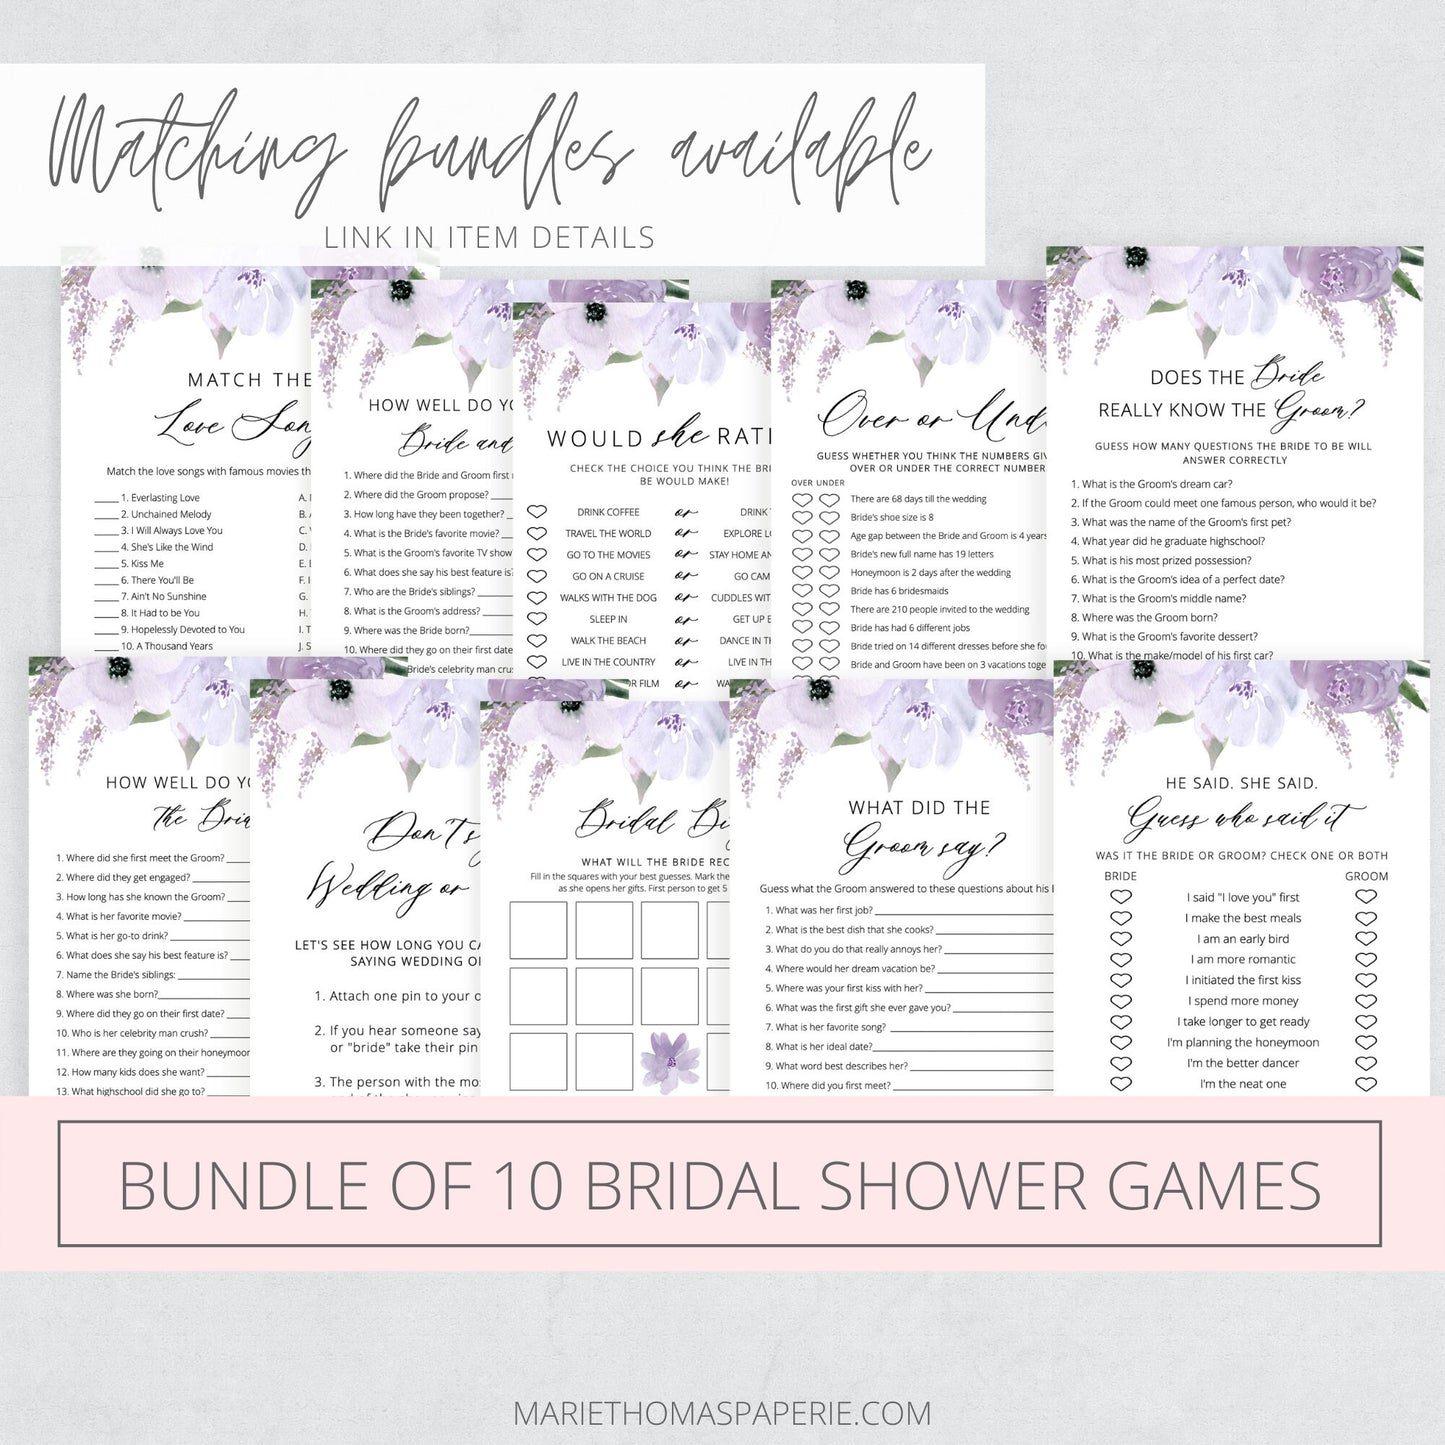 Editable How Well Do You Know the Bride and Groom Bridal Shower Games Lavender Wedding Game Template